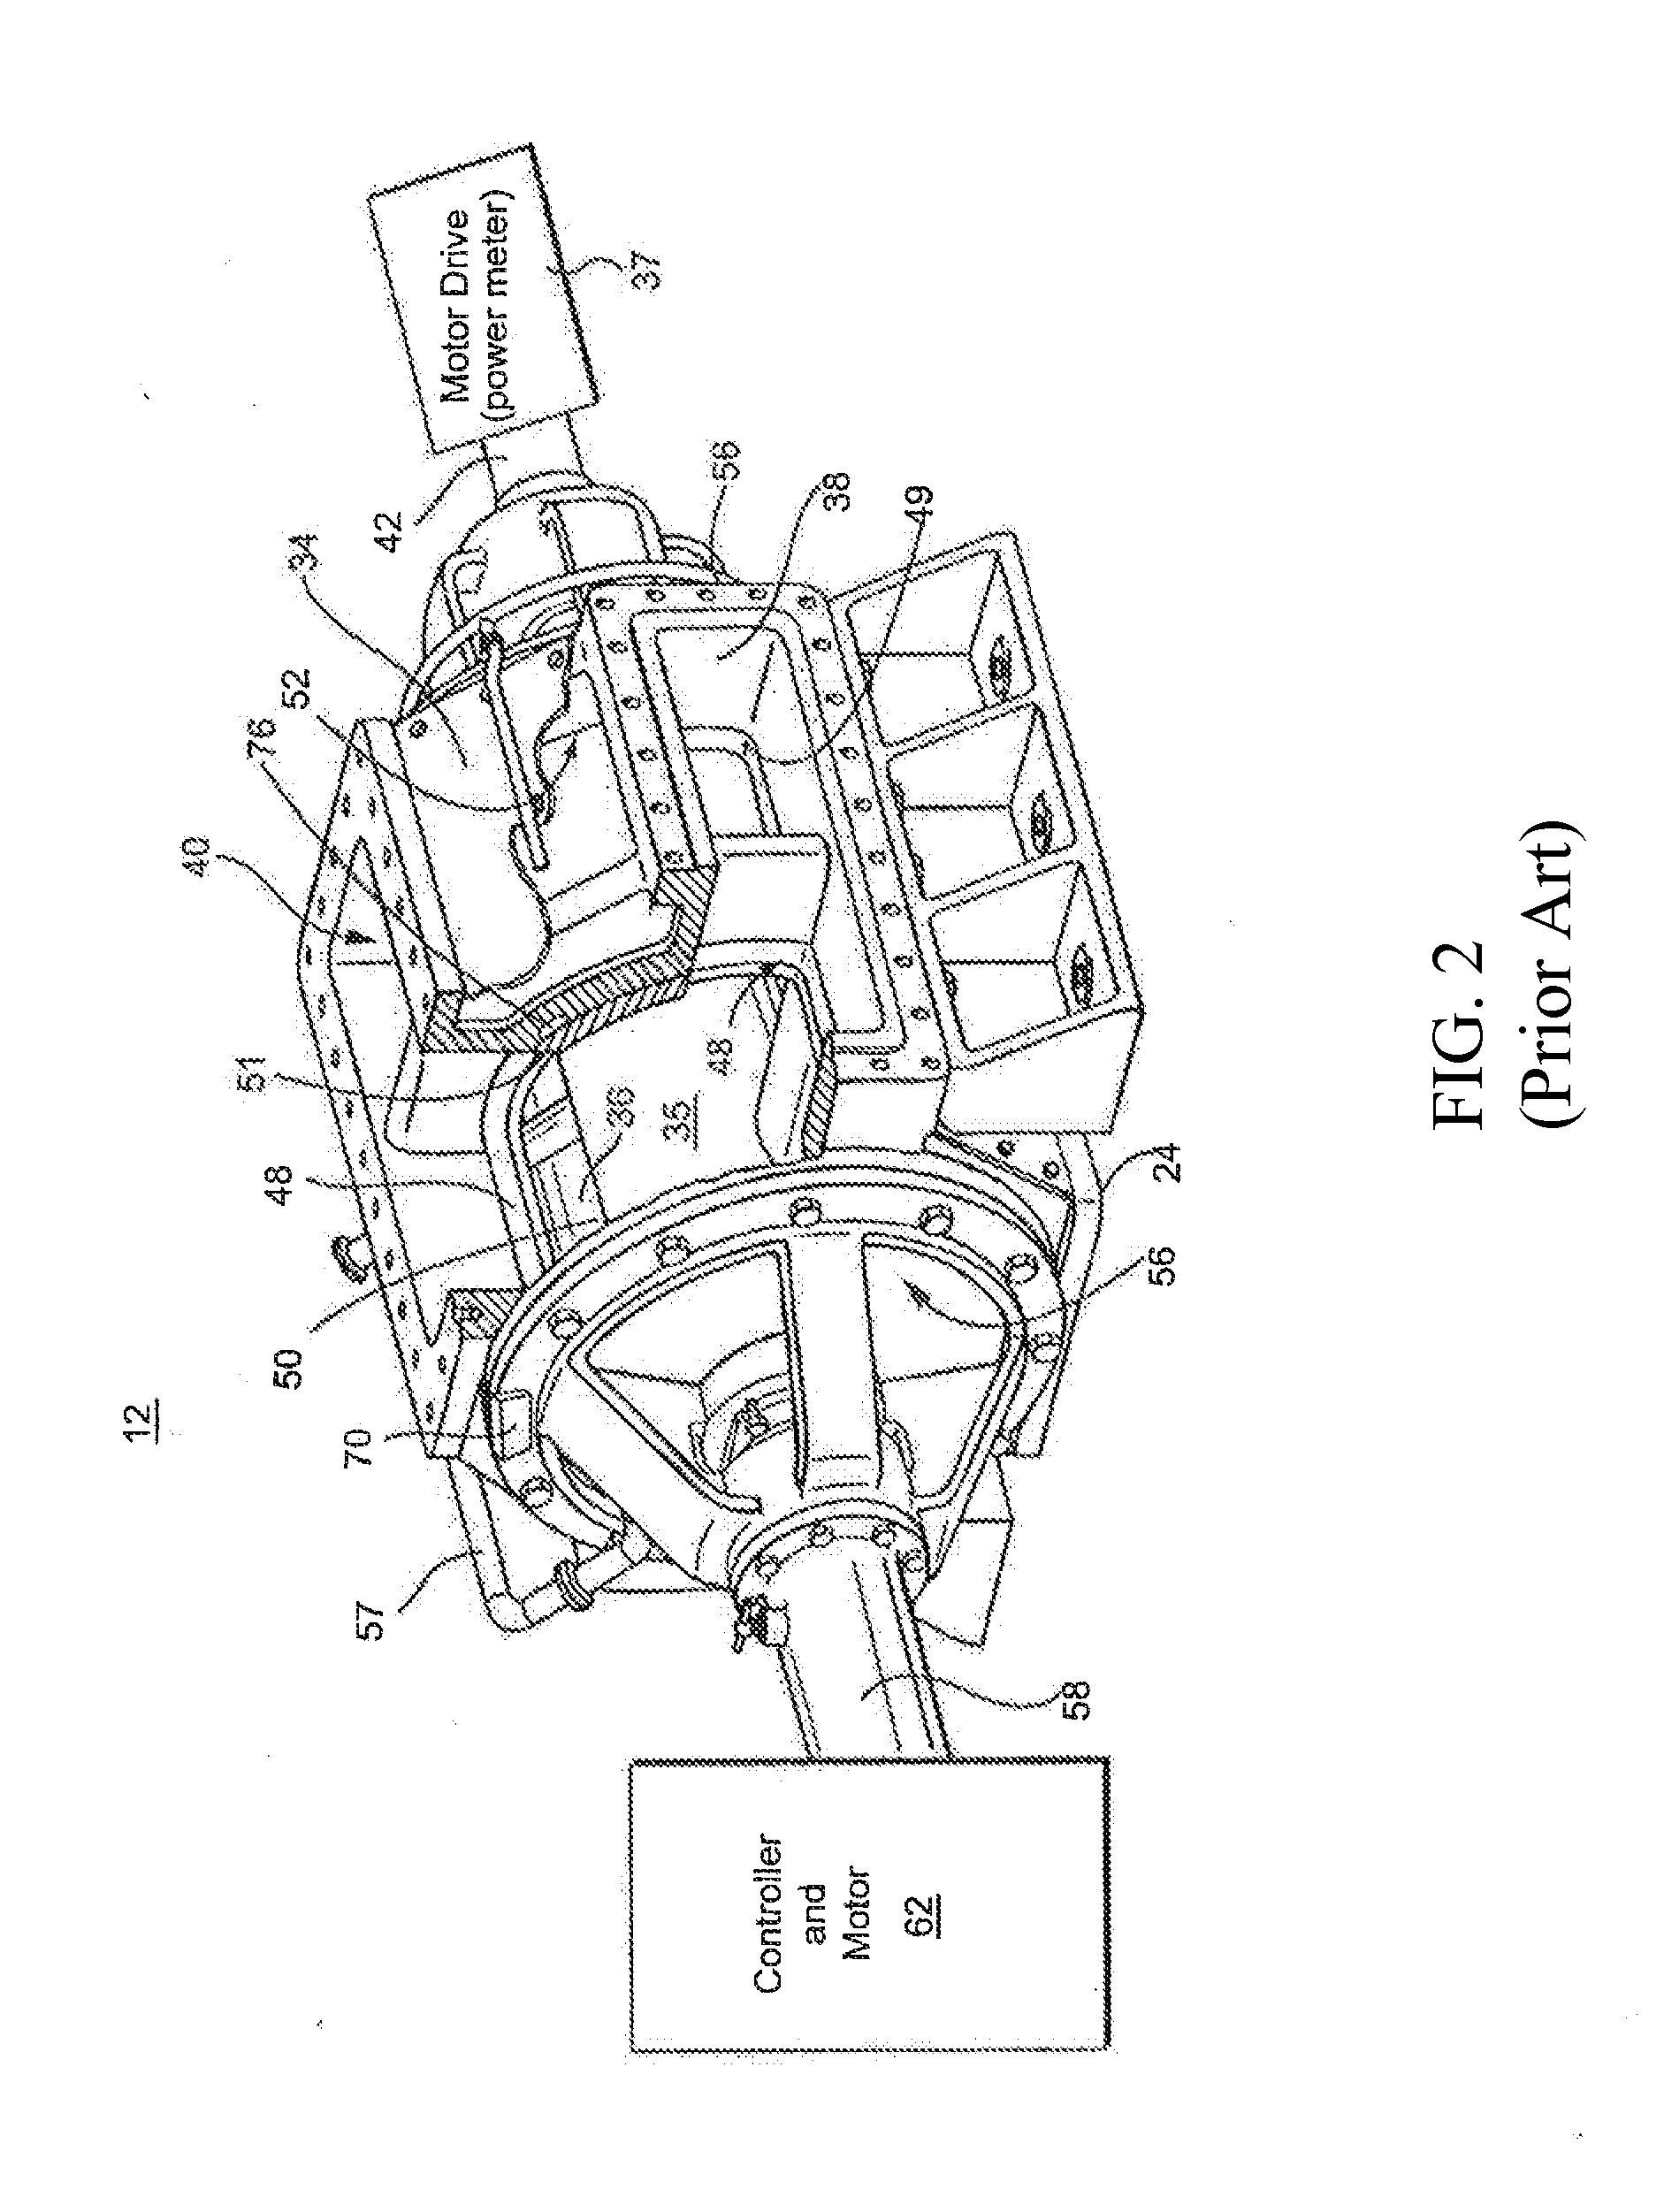 Adjustment housing assembly and monitoring and support system for a rotary feeder in a cellulose chip feeding system for a continuous digester